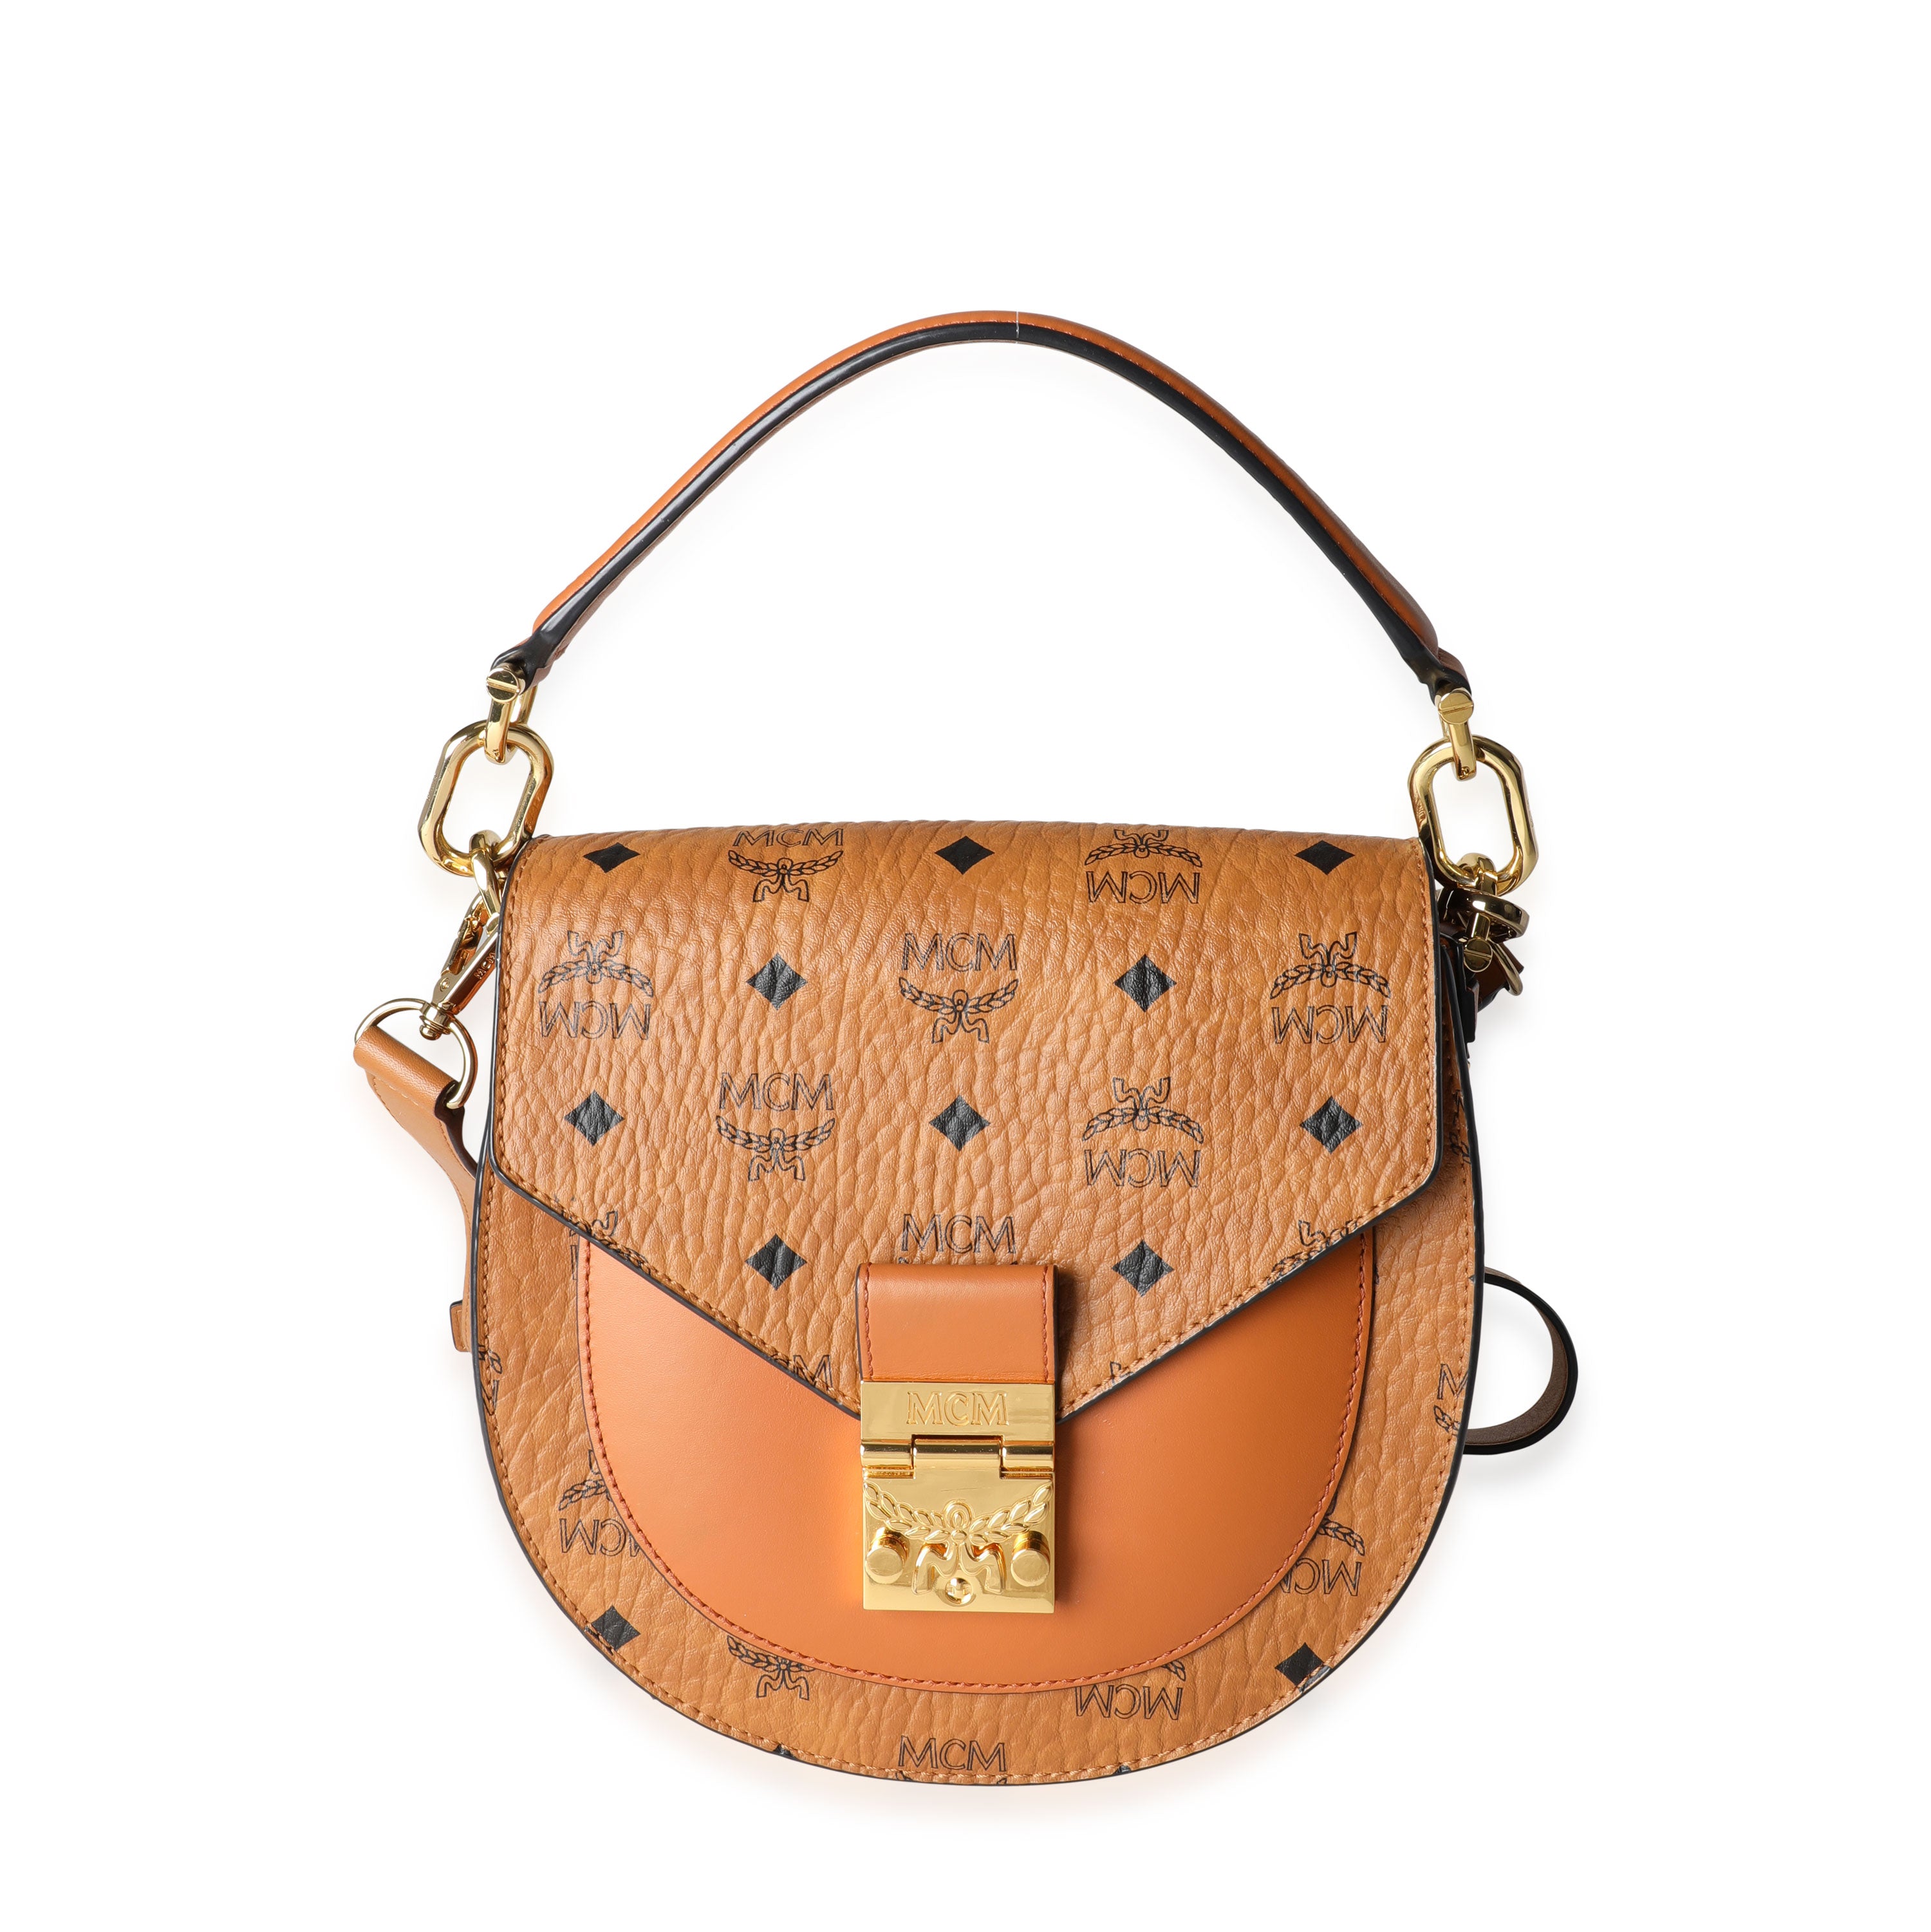 MCM Cognac Coated Canvas and Leather Visetos Patricia Bag